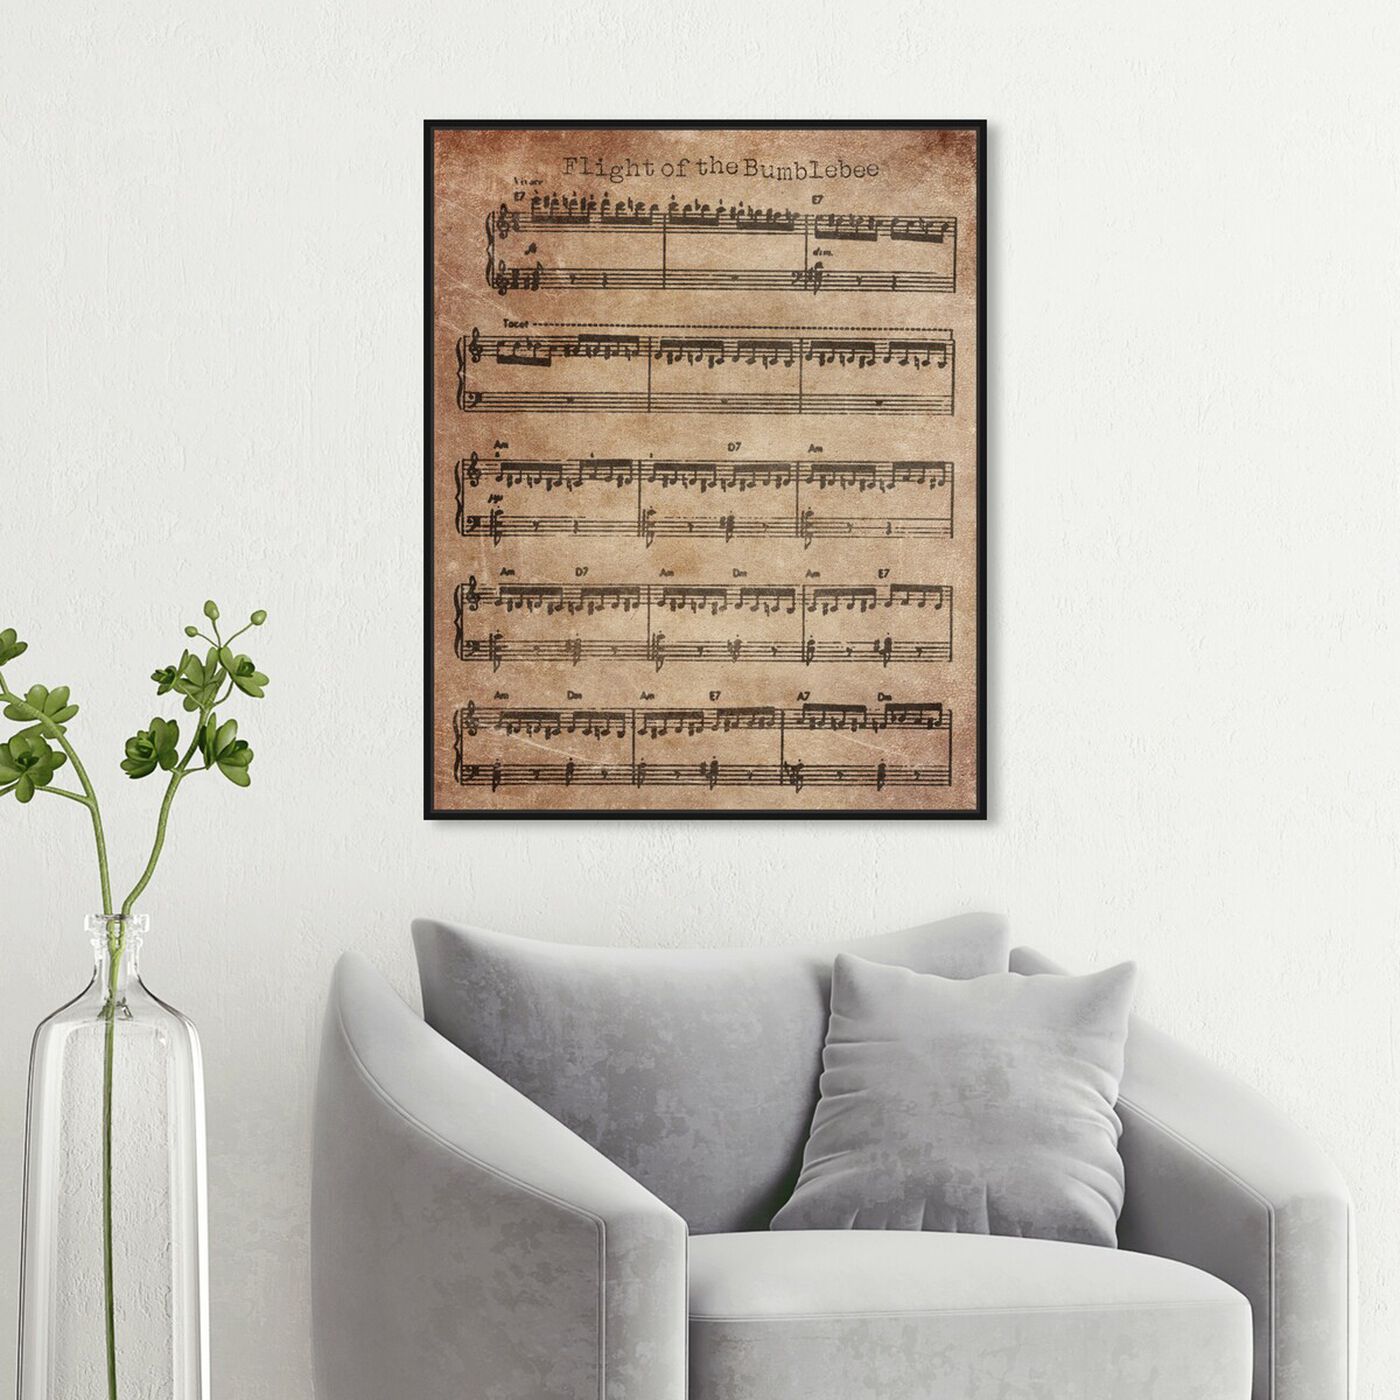 Hanging view of Flight of the Bumblebee featuring music and dance and music notes art.